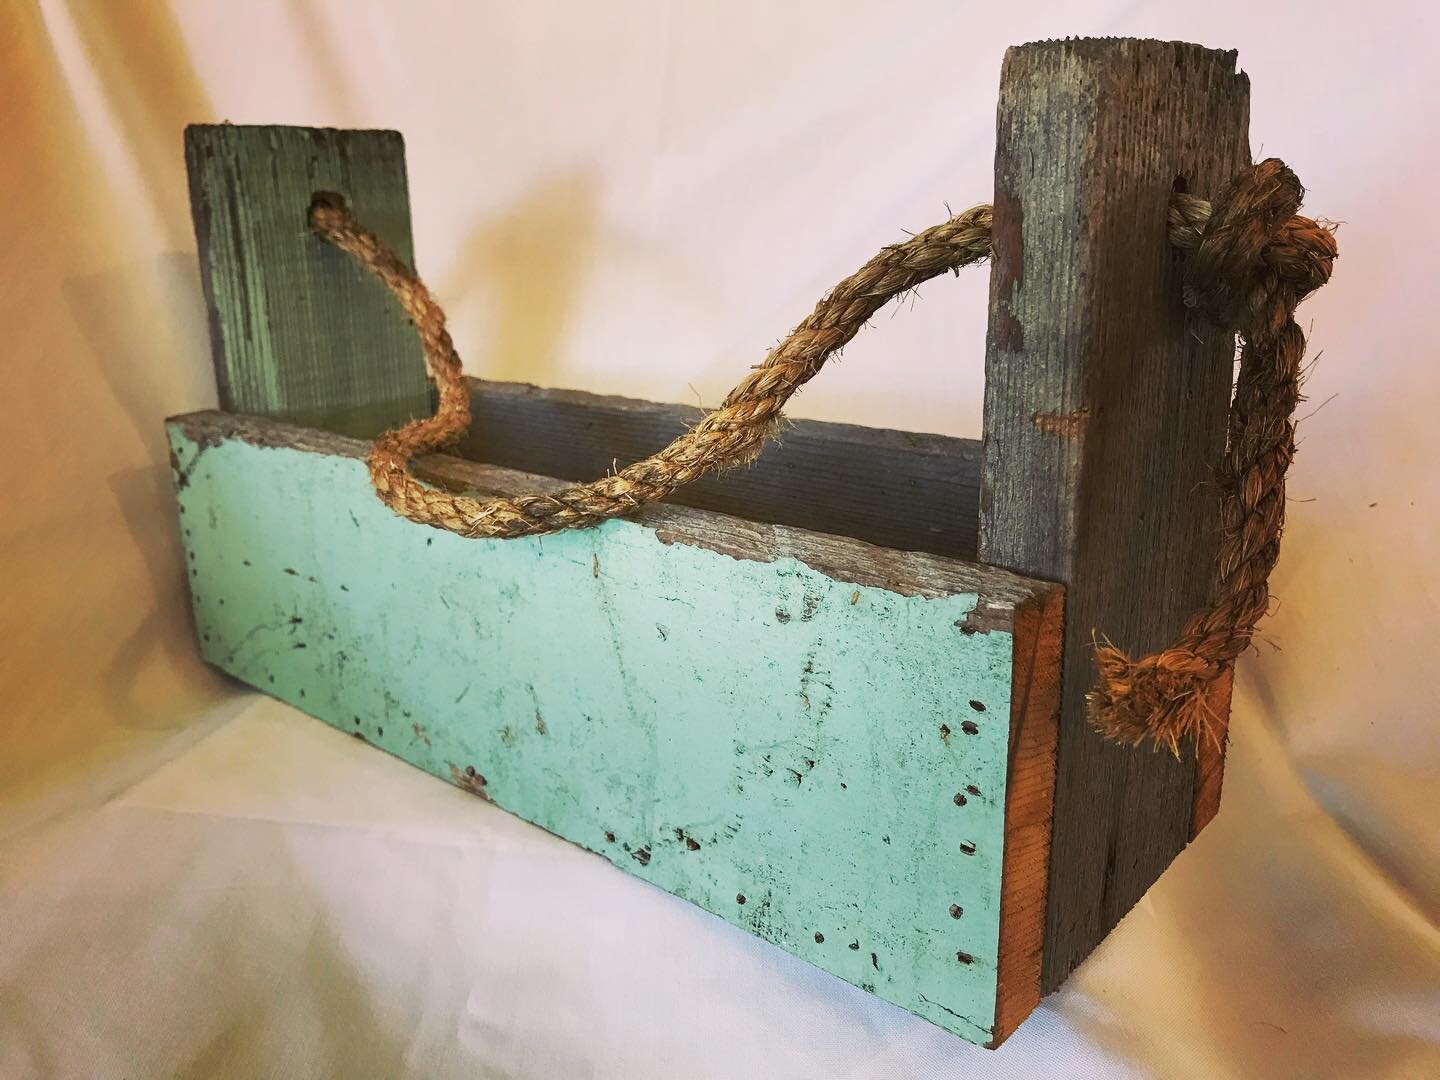 Salvaged Shipwright&rsquo;s Caddy!
Available at TroubleHouse.org
Link in bio